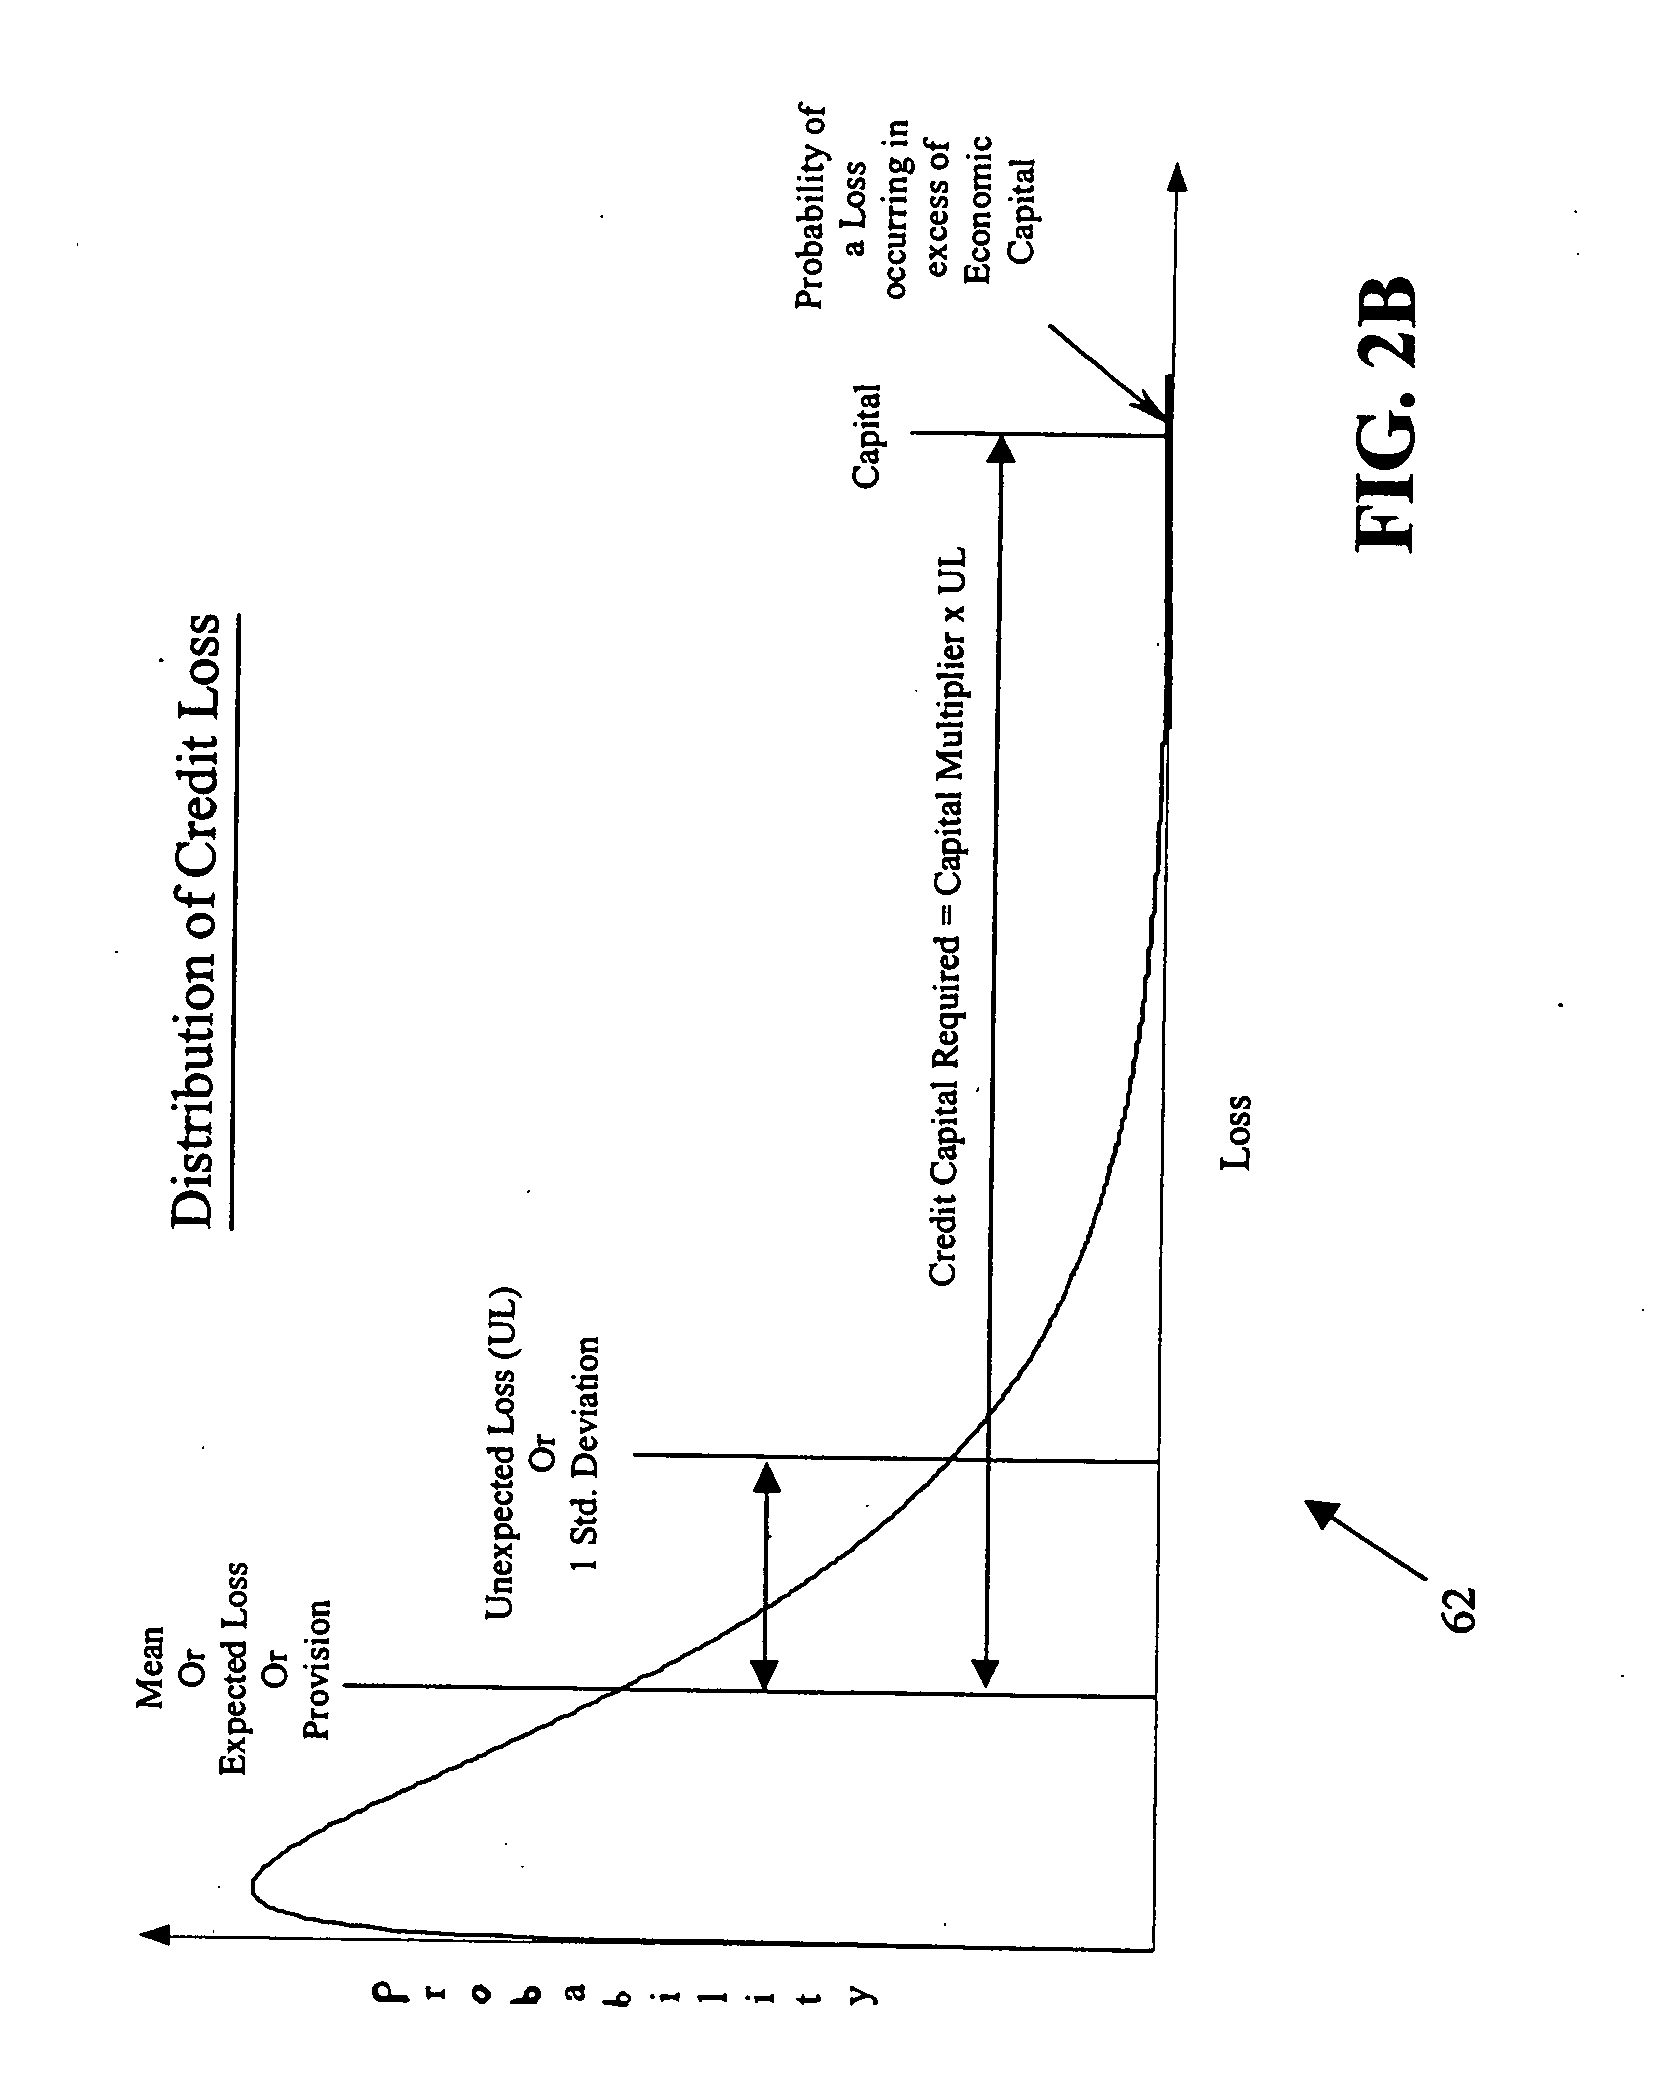 System and method for analyzing risk and profitability of non-recourse loans